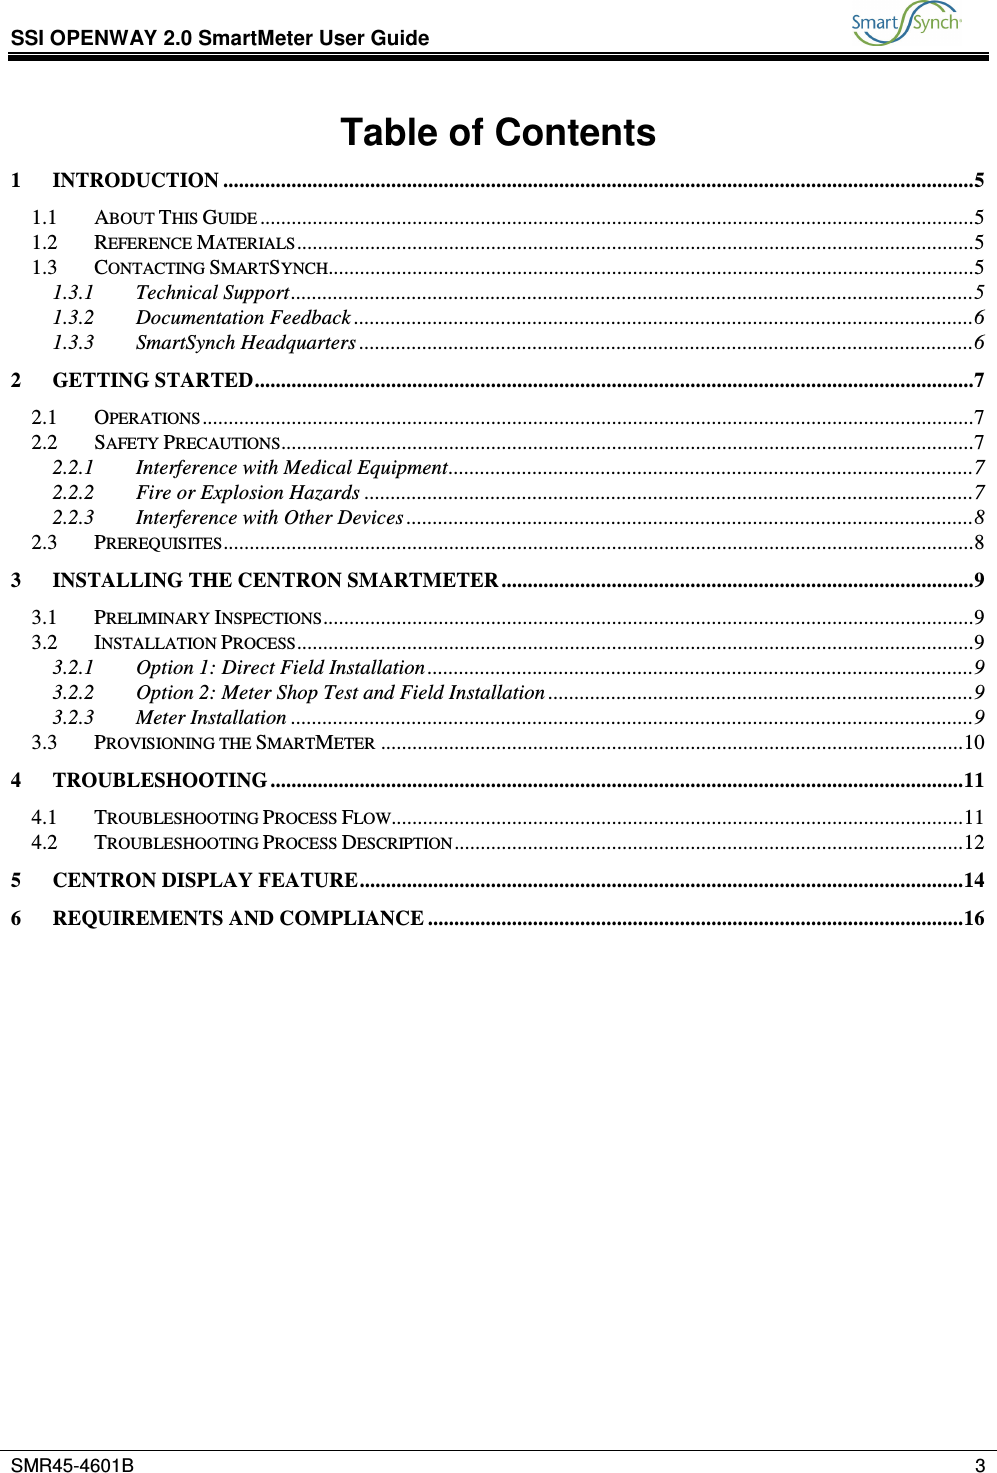 SSI OPENWAY 2.0 SmartMeter User Guide           SMR45-4601B    3  Table of Contents 1 INTRODUCTION ...............................................................................................................................................5 1.1 ABOUT THIS GUIDE ........................................................................................................................................5 1.2 REFERENCE MATERIALS.................................................................................................................................5 1.3 CONTACTING SMARTSYNCH...........................................................................................................................5 1.3.1 Technical Support..................................................................................................................................5 1.3.2 Documentation Feedback ......................................................................................................................6 1.3.3 SmartSynch Headquarters .....................................................................................................................6 2 GETTING STARTED.........................................................................................................................................7 2.1 OPERATIONS...................................................................................................................................................7 2.2 SAFETY PRECAUTIONS....................................................................................................................................7 2.2.1 Interference with Medical Equipment....................................................................................................7 2.2.2 Fire or Explosion Hazards ....................................................................................................................7 2.2.3 Interference with Other Devices ............................................................................................................8 2.3 PREREQUISITES...............................................................................................................................................8 3 INSTALLING THE CENTRON SMARTMETER..........................................................................................9 3.1 PRELIMINARY INSPECTIONS............................................................................................................................9 3.2 INSTALLATION PROCESS.................................................................................................................................9 3.2.1 Option 1: Direct Field Installation ........................................................................................................9 3.2.2 Option 2: Meter Shop Test and Field Installation .................................................................................9 3.2.3 Meter Installation ..................................................................................................................................9 3.3 PROVISIONING THE SMARTMETER ...............................................................................................................10 4 TROUBLESHOOTING ....................................................................................................................................11 4.1 TROUBLESHOOTING PROCESS FLOW.............................................................................................................11 4.2 TROUBLESHOOTING PROCESS DESCRIPTION.................................................................................................12 5 CENTRON DISPLAY FEATURE...................................................................................................................14 6 REQUIREMENTS AND COMPLIANCE ......................................................................................................16  